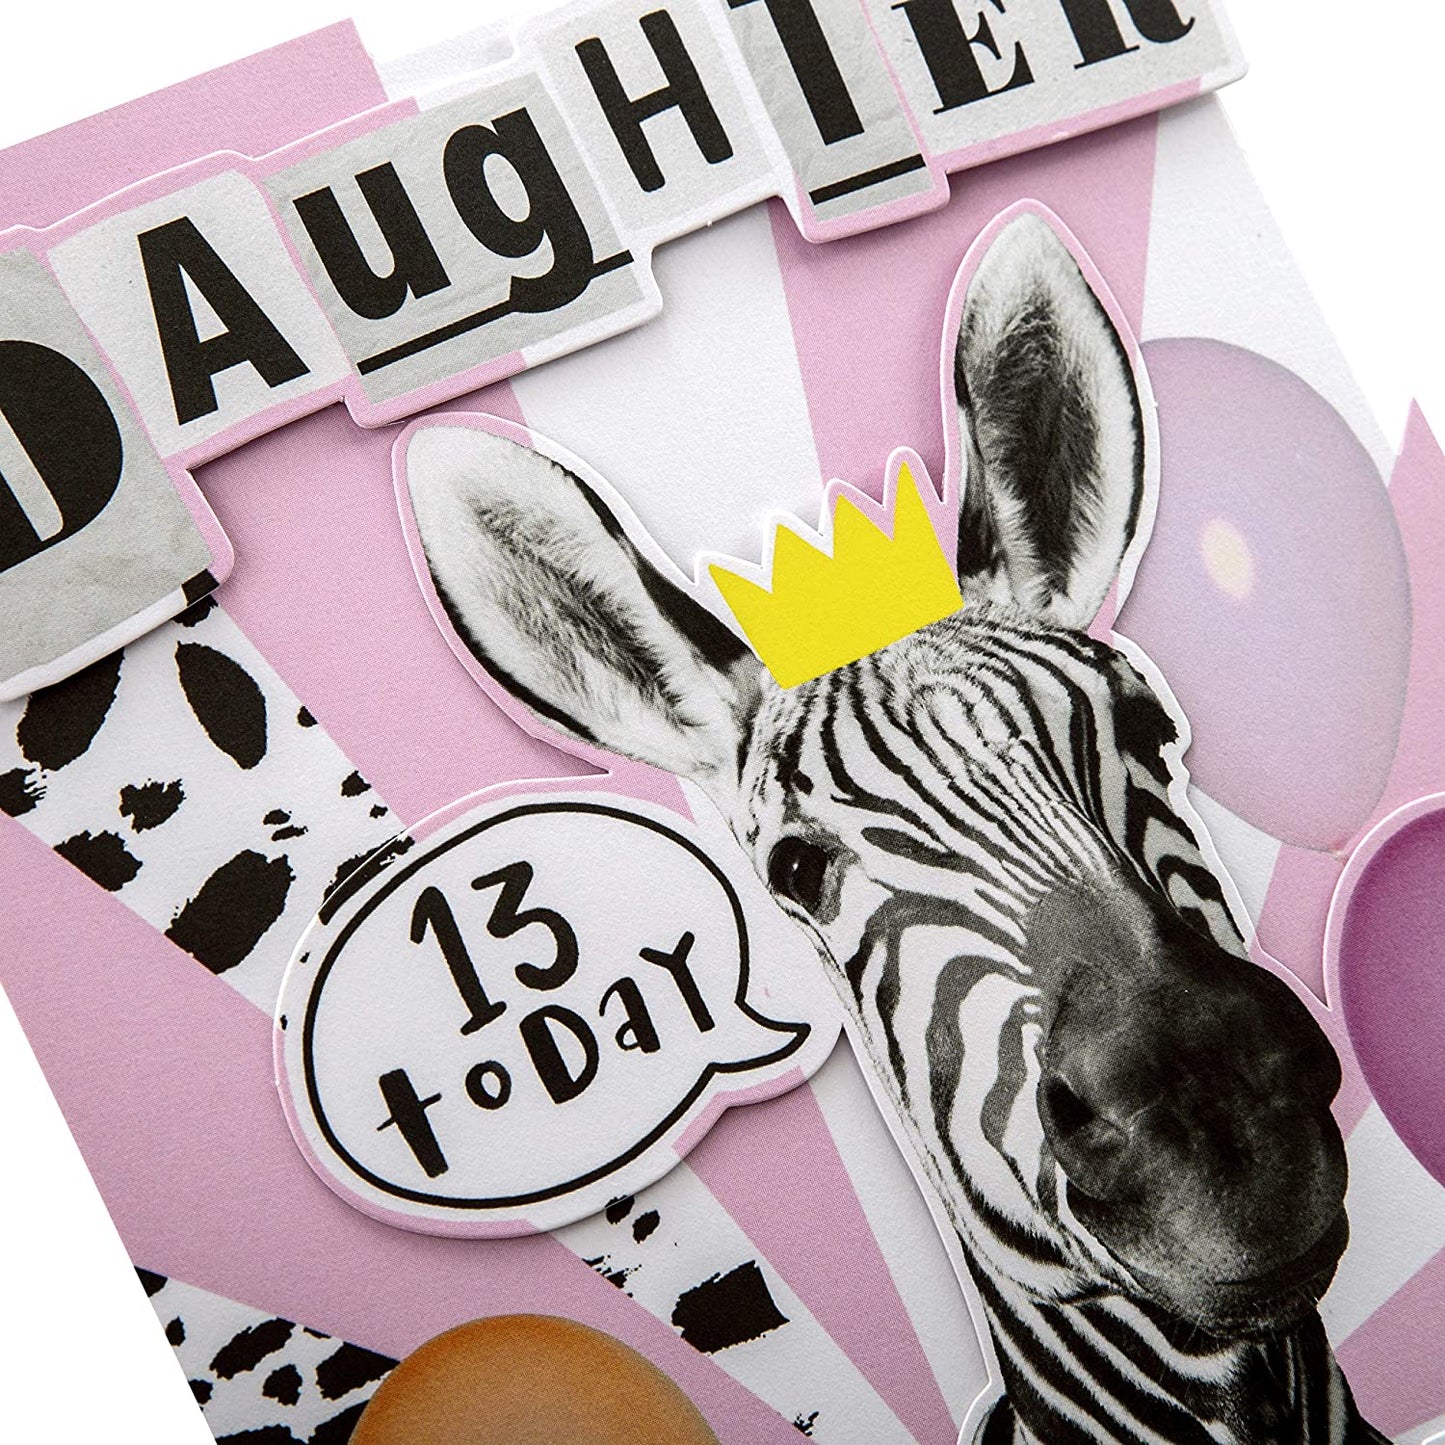 Die-cut 3D Design 13th Birthday Card for Daughter